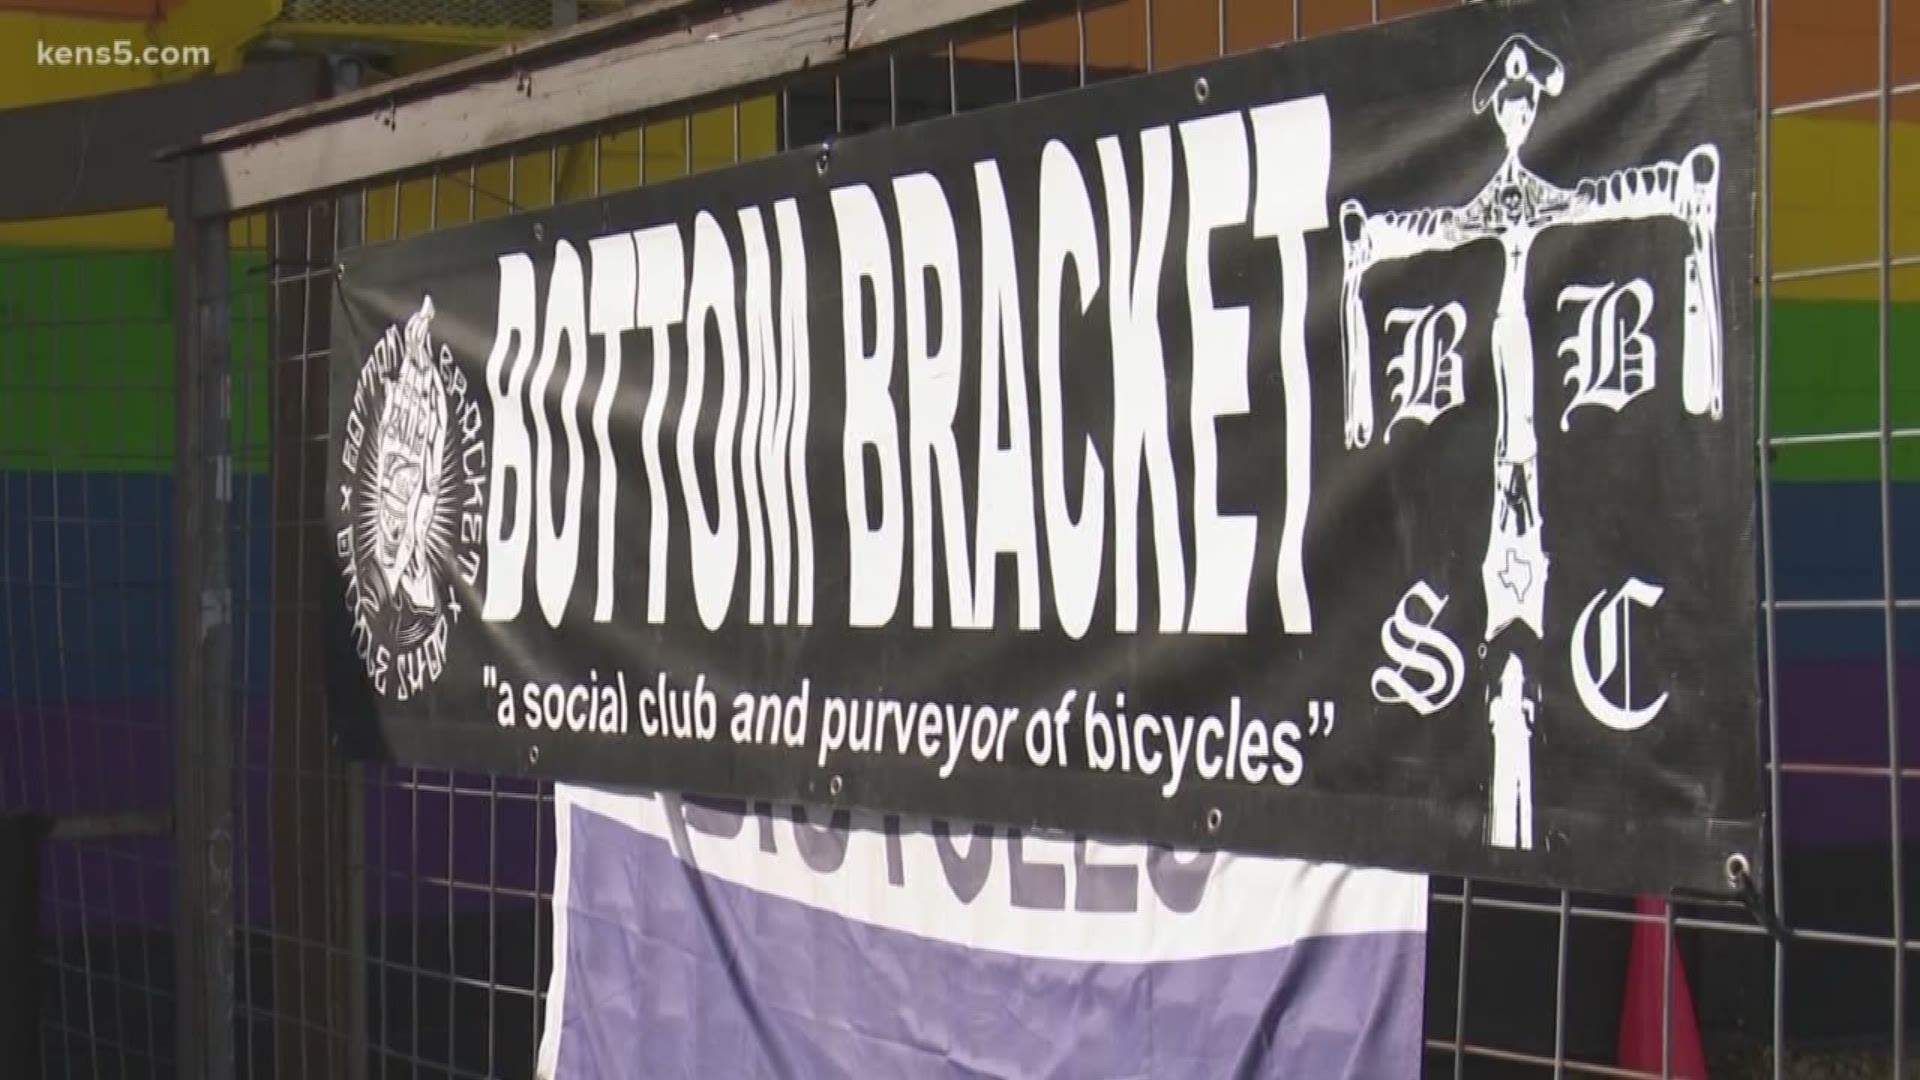 A south side staple, The Bottom Bracket Bicycle Shop is hosting a fundraiser online and in person to stay open. Eyewitness News reporter Aaron Wright has the story.